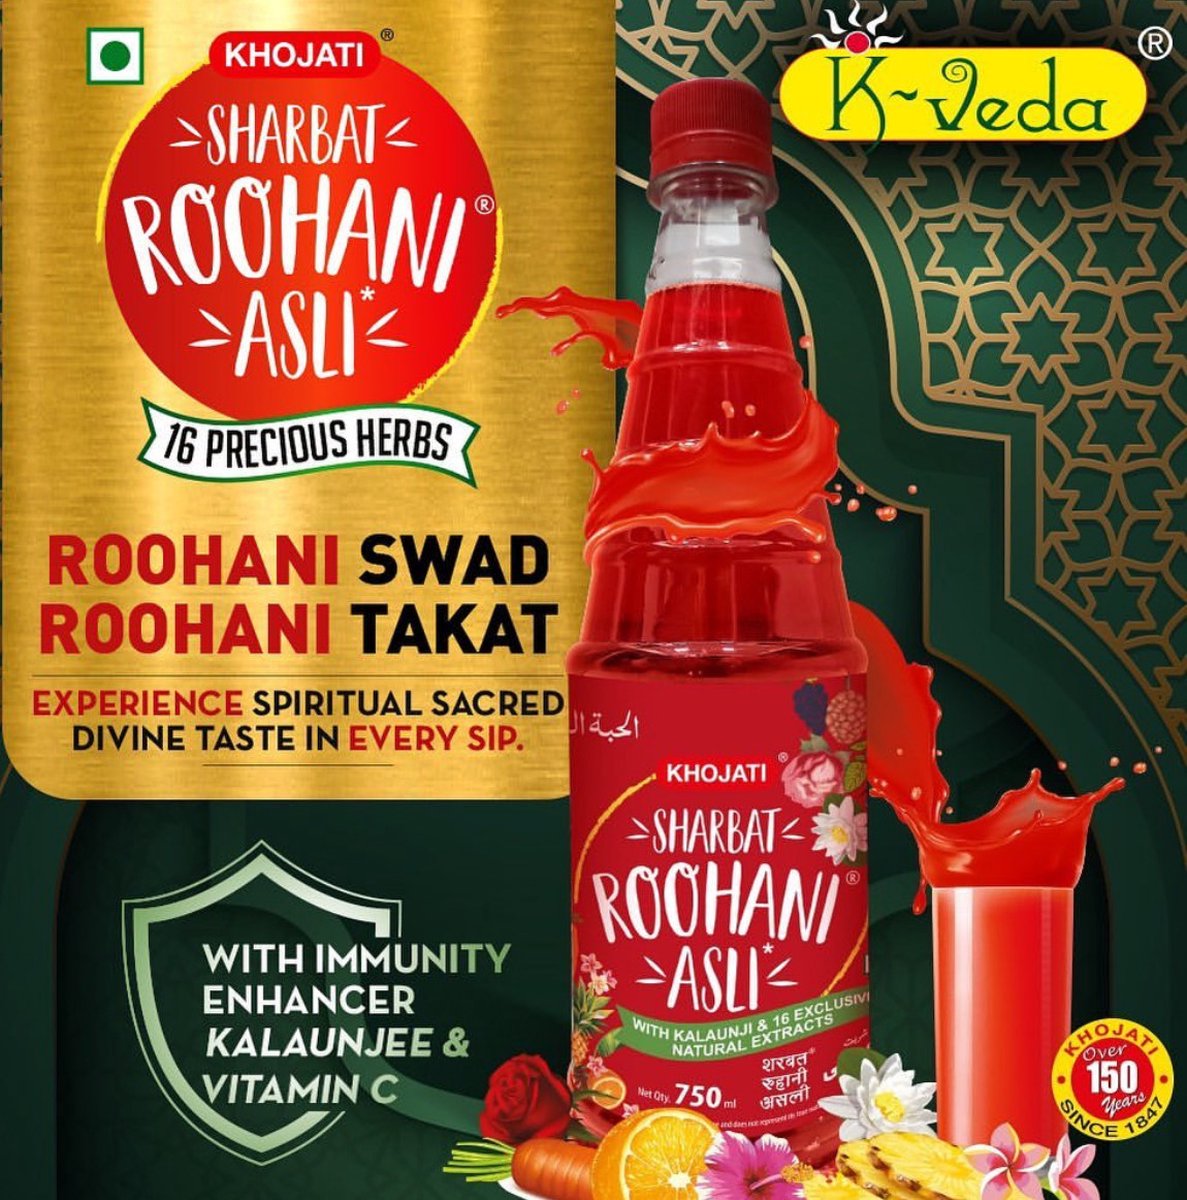 K-Veda Sharbat Roohani Asli drank - With Kalaunji & 16 Exclusive Natural Extracts - The classic tasty experience you had been longing for - Vitamin C - gratis K-Veda Roohani Asli drank giftbag 750 ml